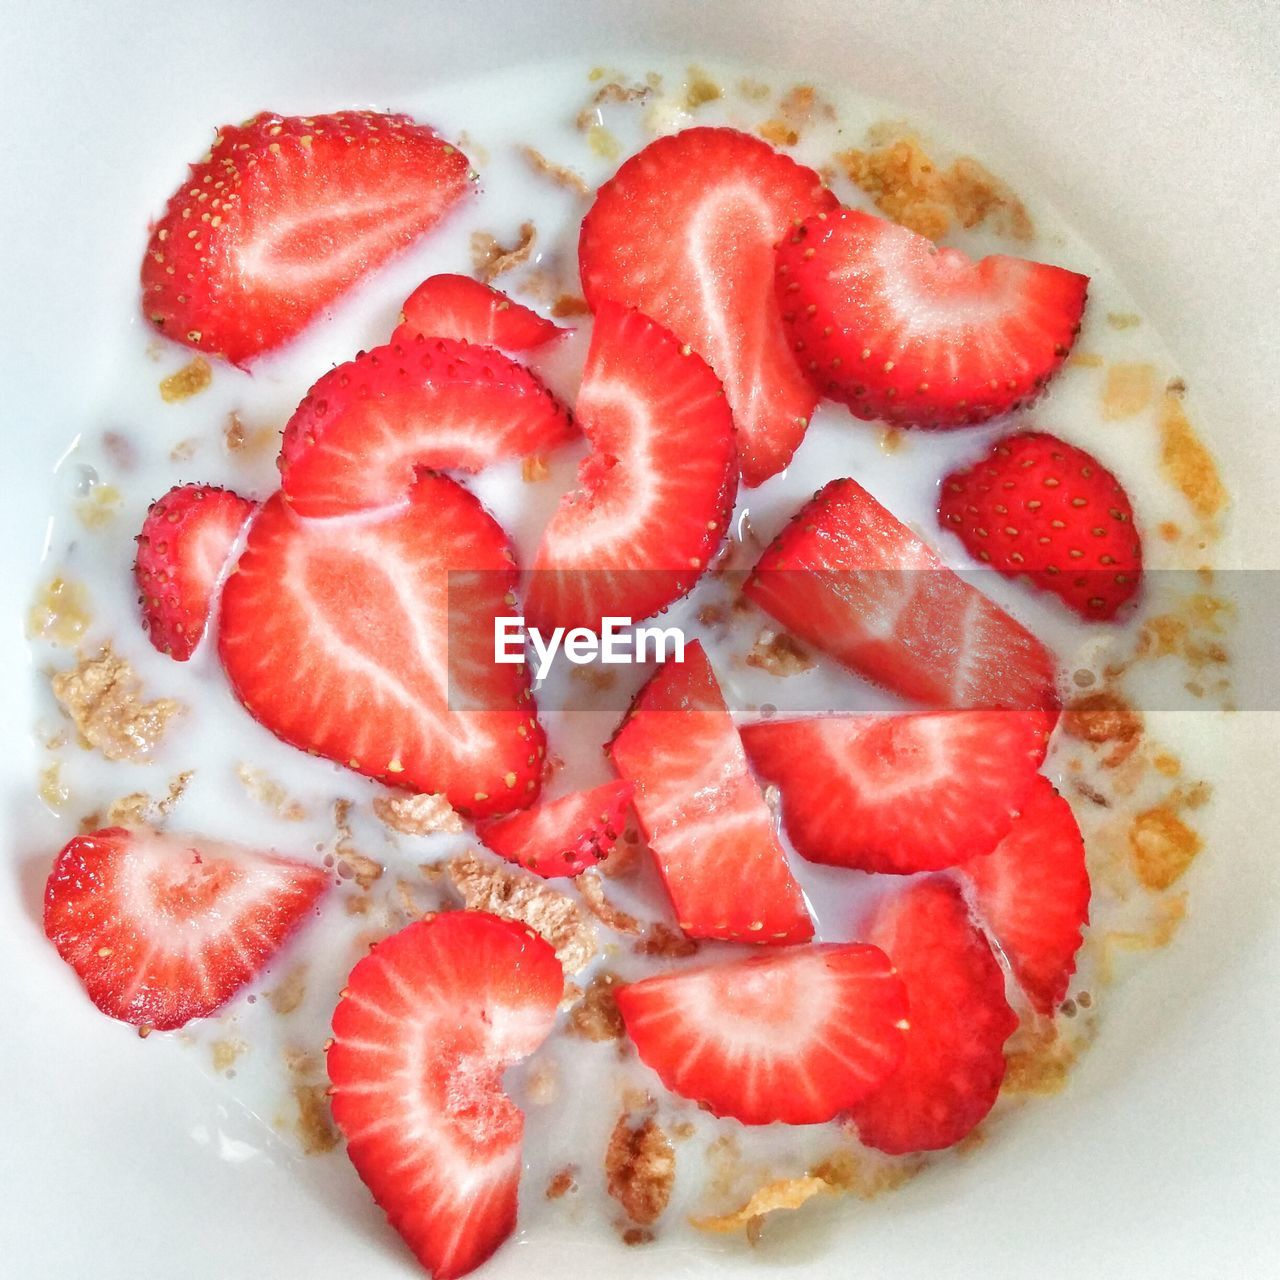 Cereals with fresh strawberries